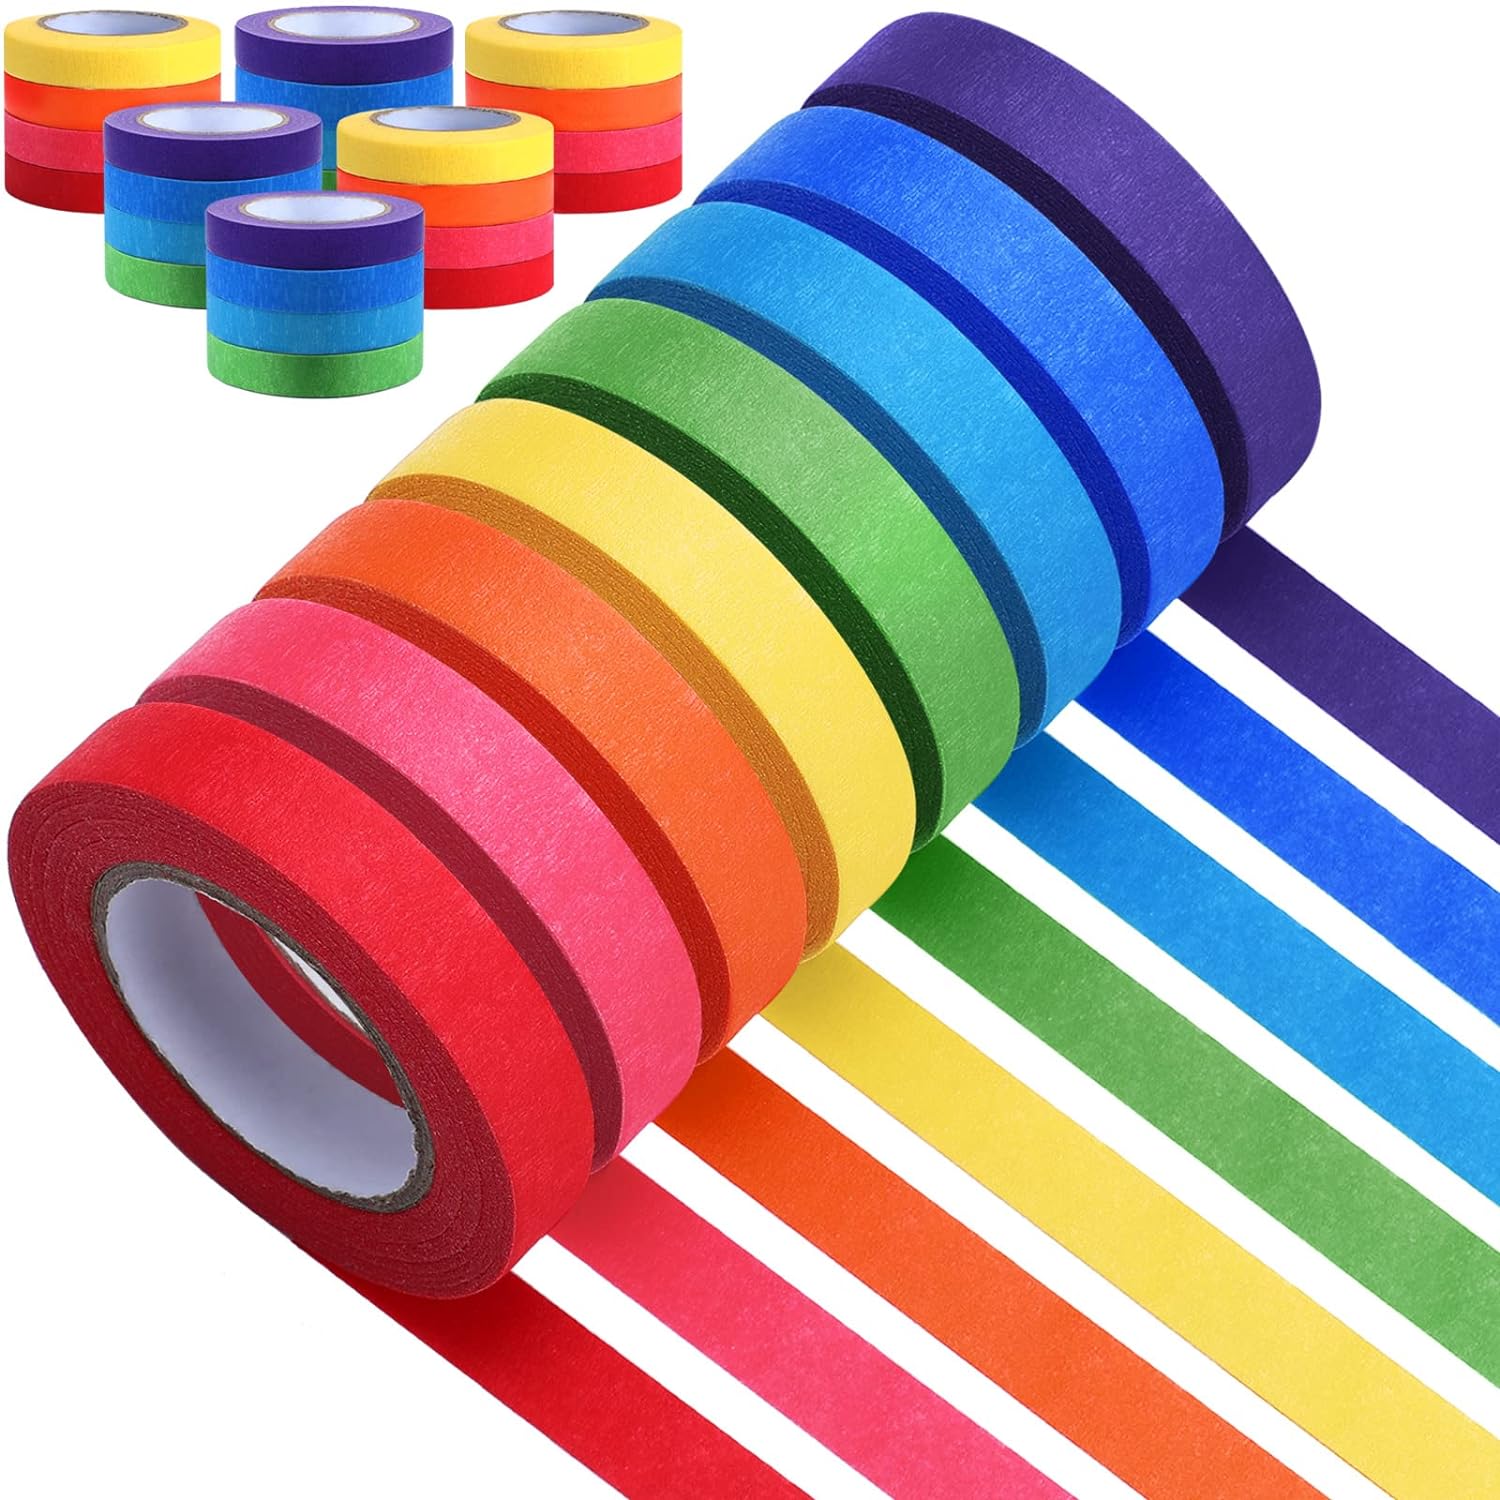 GCP Products 48 Rolls Colored Masking Tape Painters Tape Rainbow Colors  Rolls Colorful Paper Tape Decorative Arts Crafts Labeling Diy Deco…